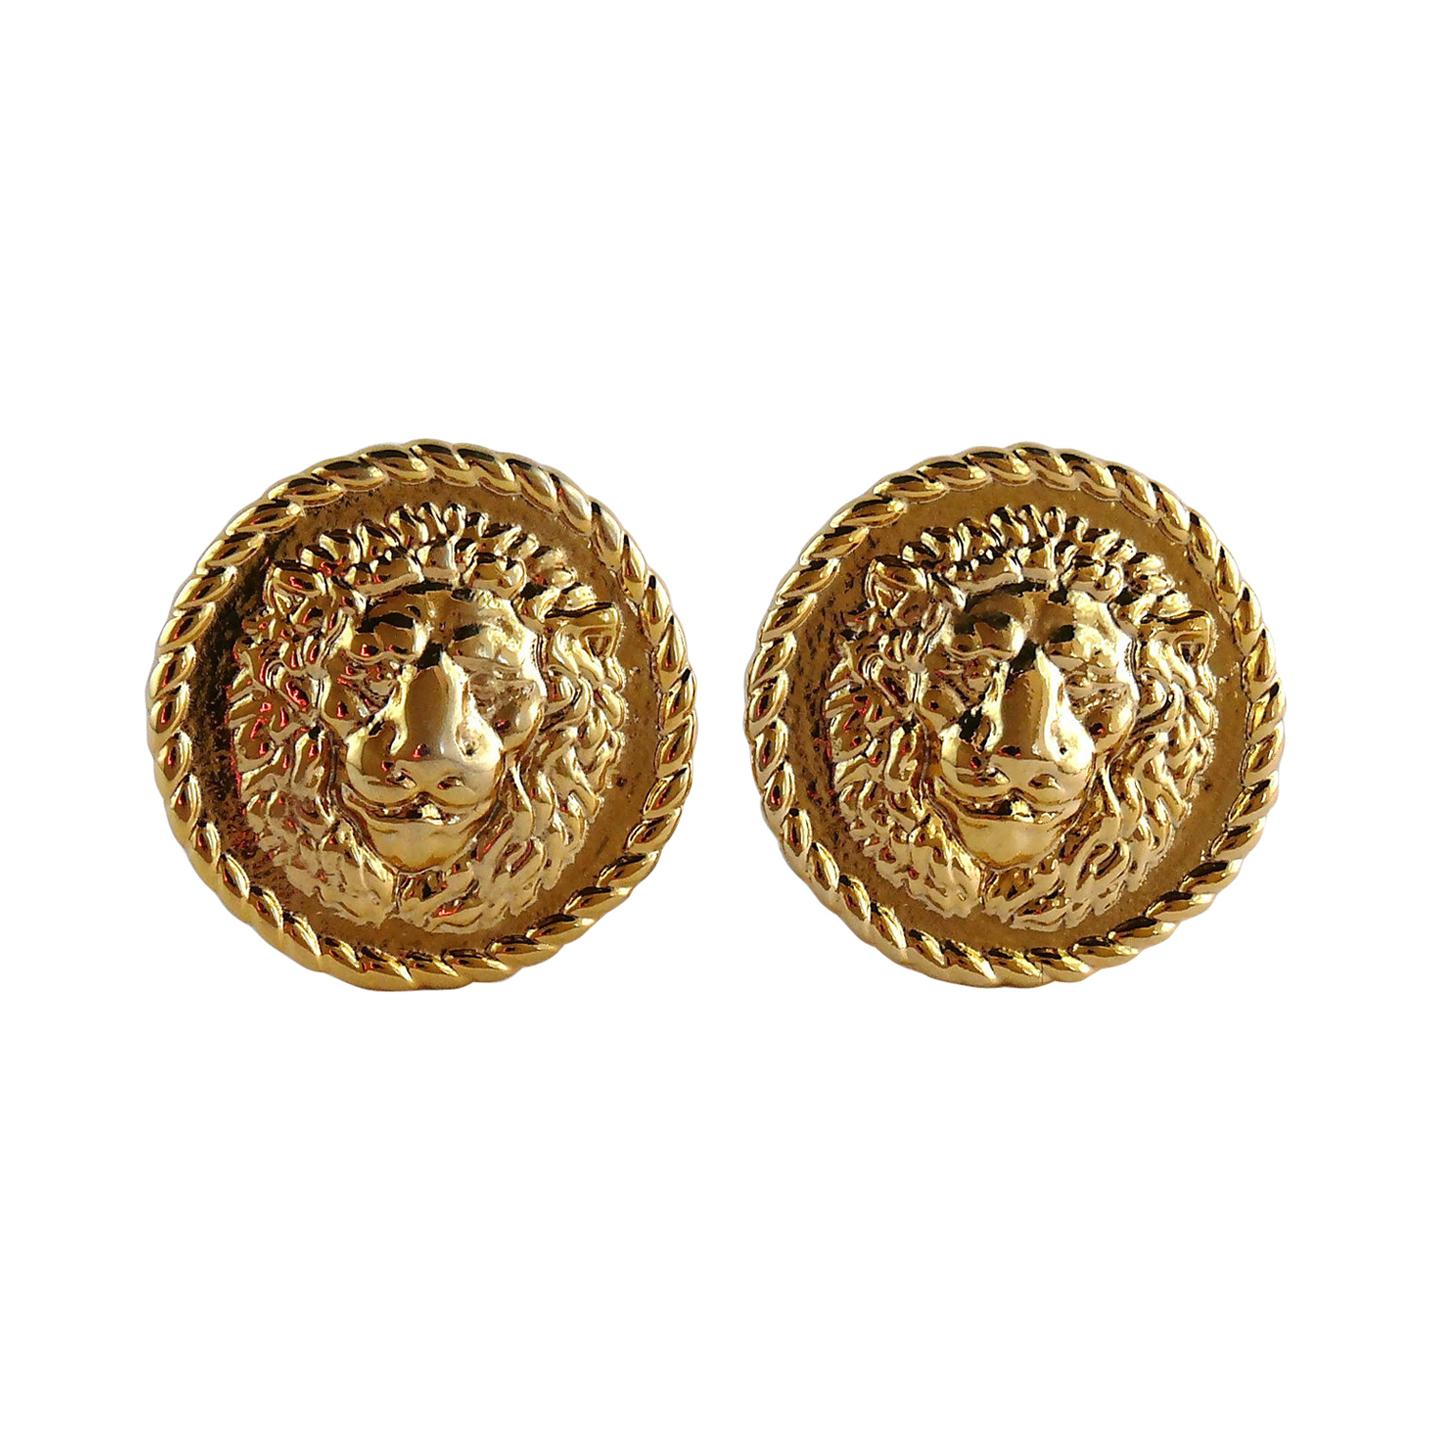 Gianni Versace Profumi Vintage Gold Toned Lion Head Clip-On Earrings